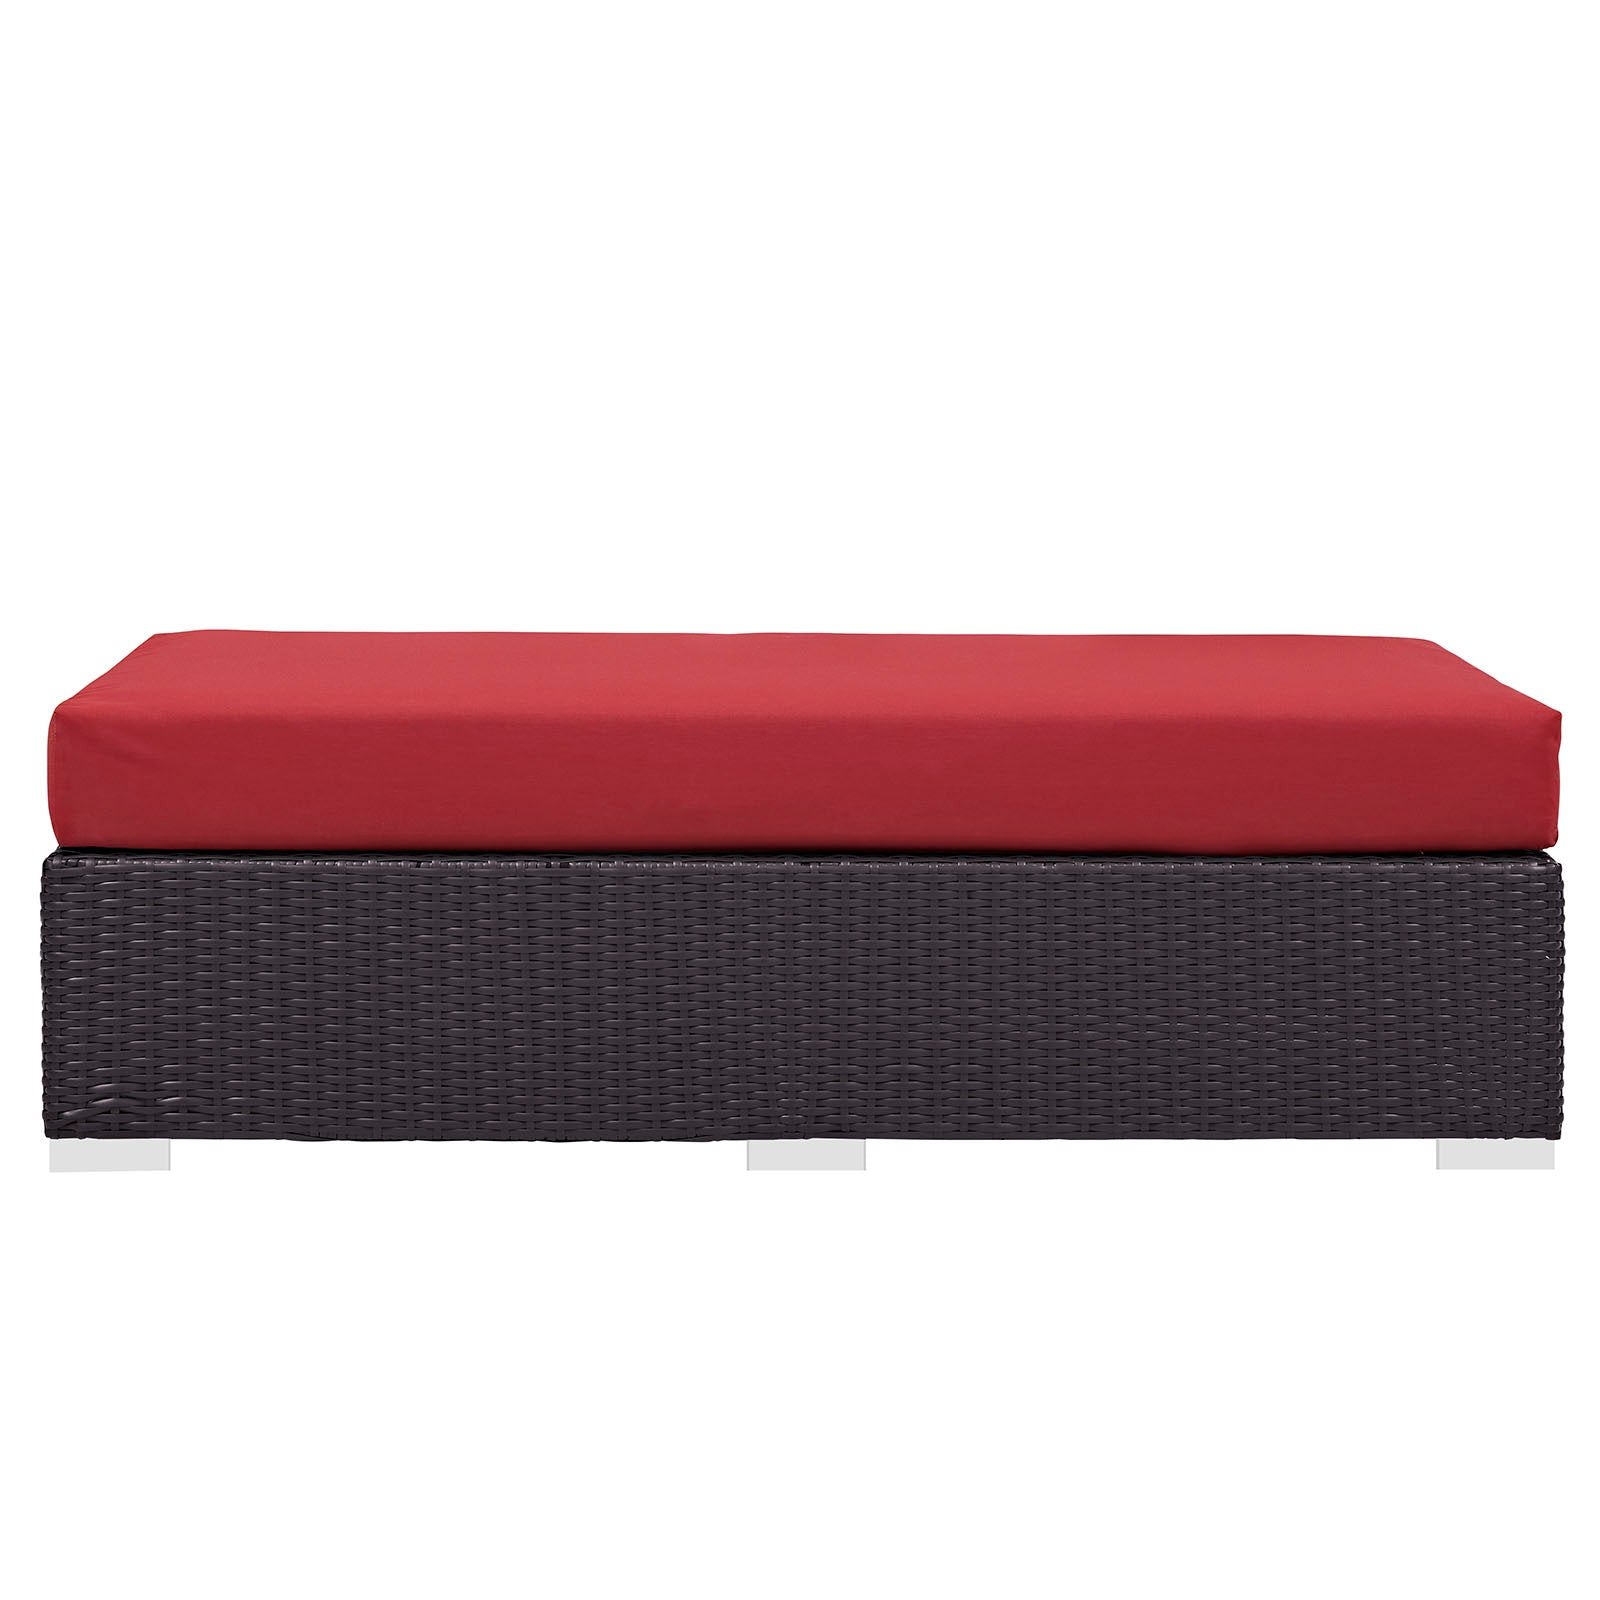 Modway Outdoor Stools & Benches - Convene Outdoor Patio Fabric Rectangle Ottoman Espresso Red